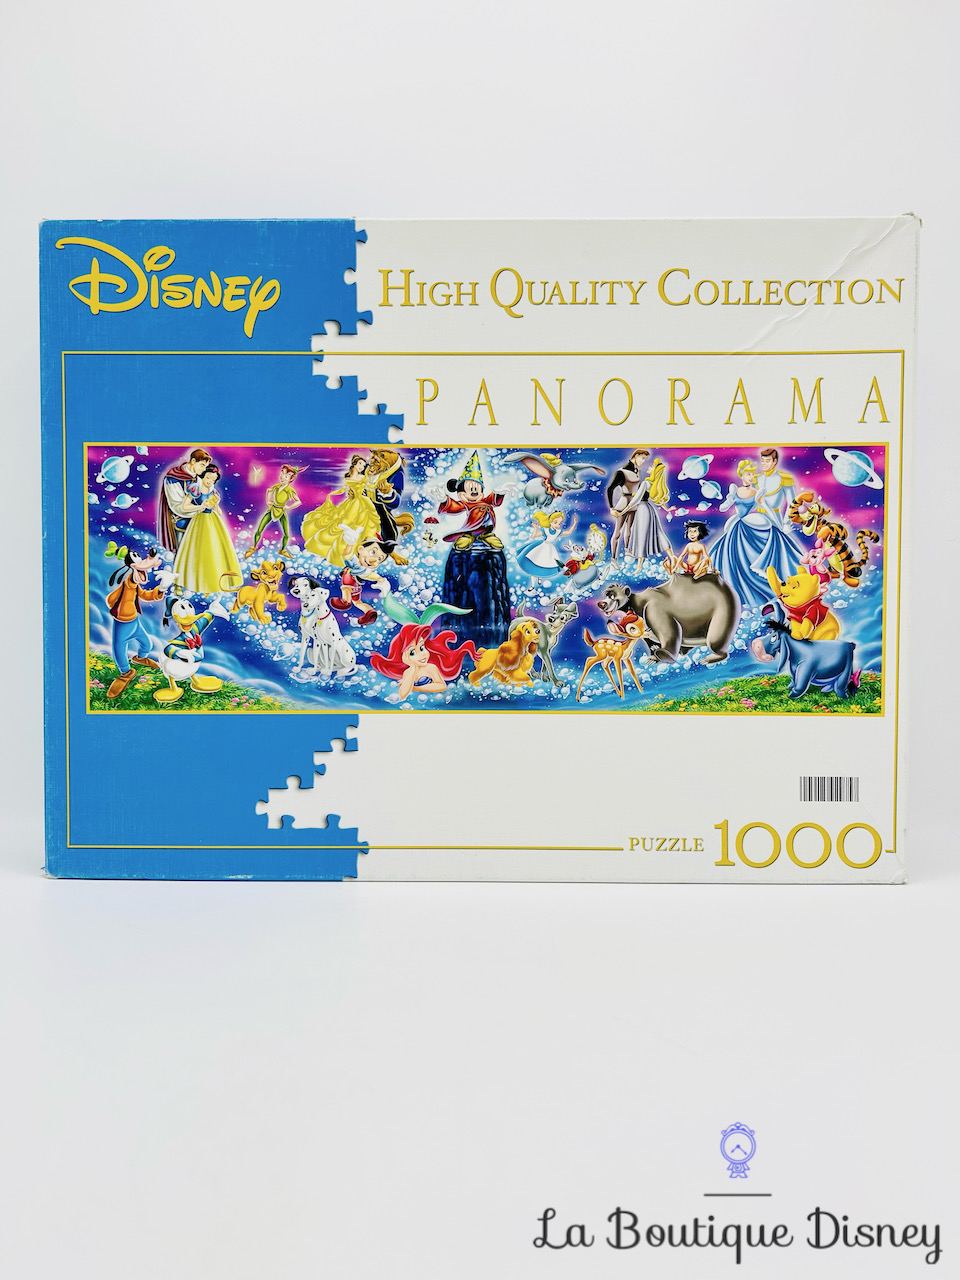 Puzzle Panorama 1000 Pièces Disney Family Clementoni N°99261 multi personnages High Quality Collection